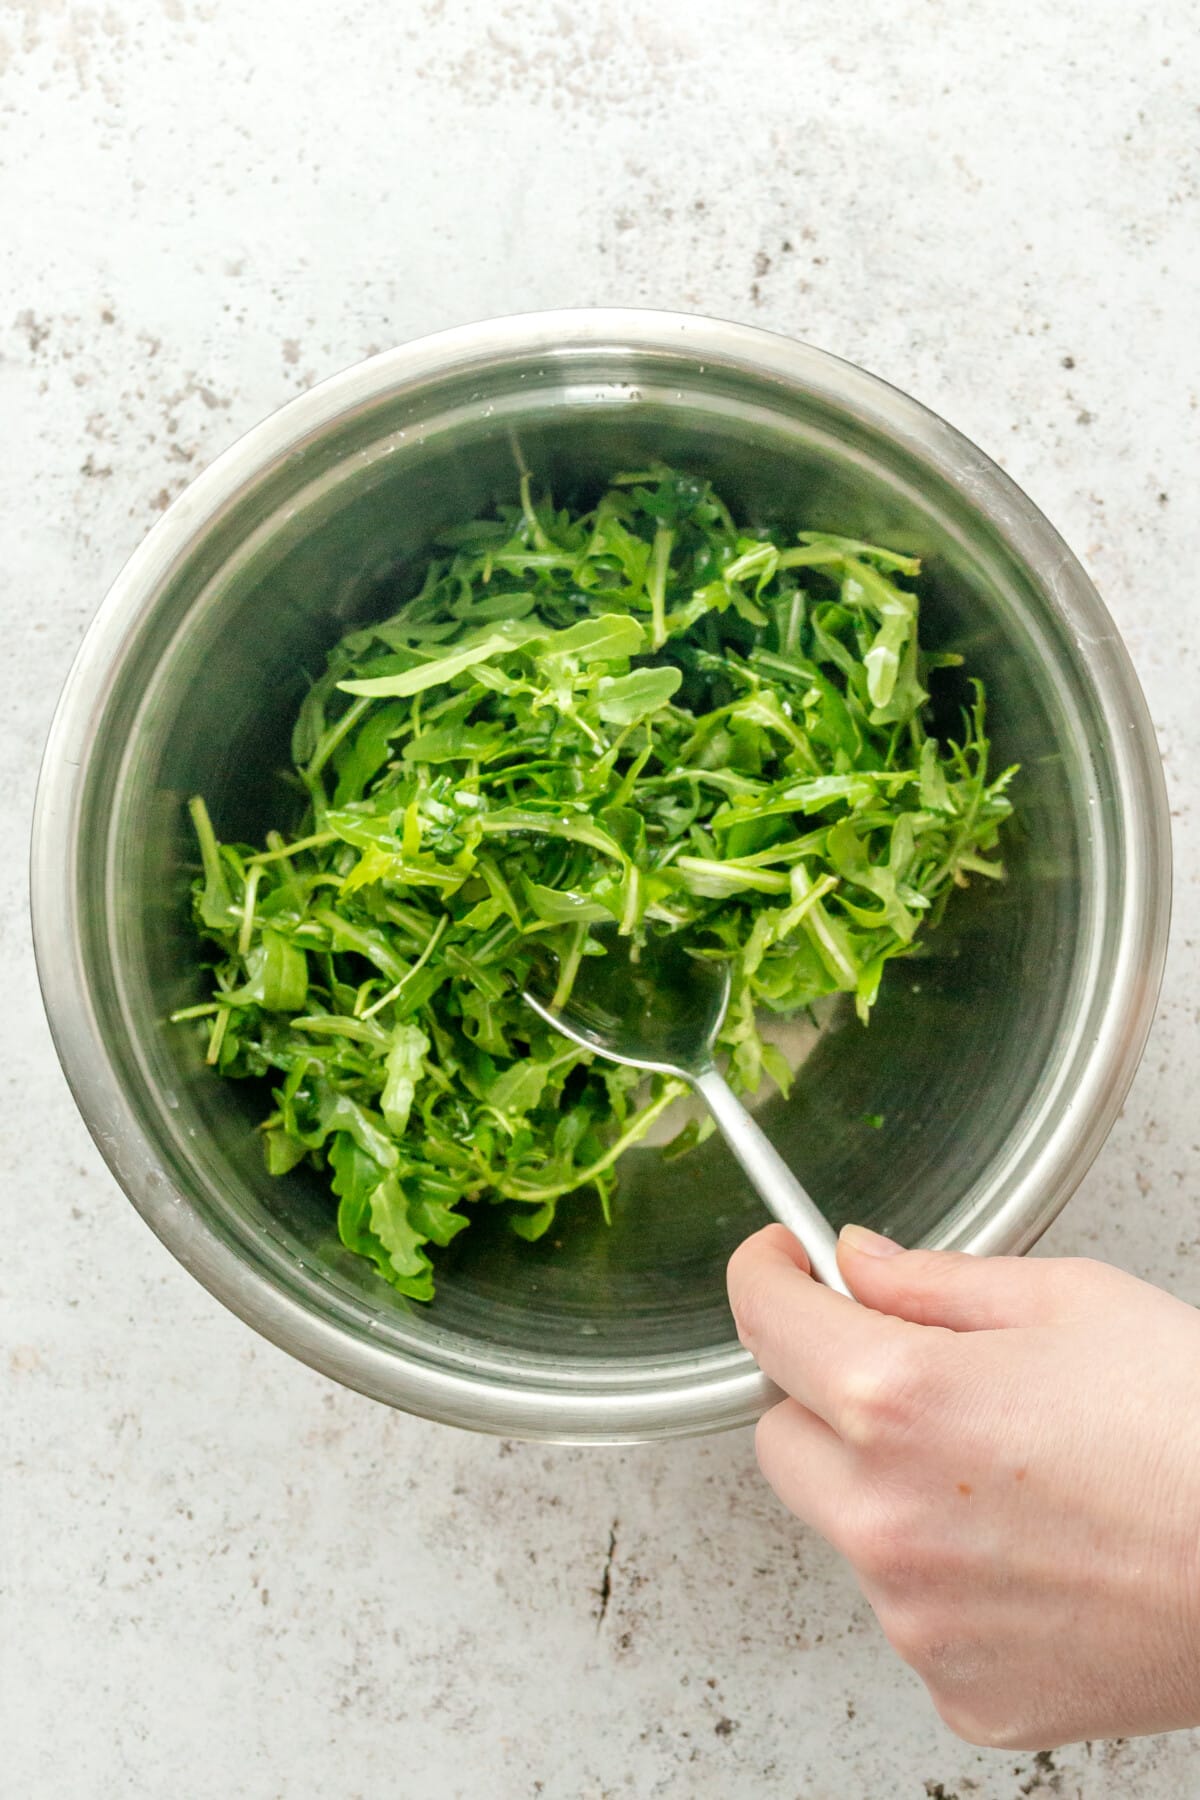 Arugula is stirred with a light dressing sitting in a stainless steel bowl on a light grey surface.